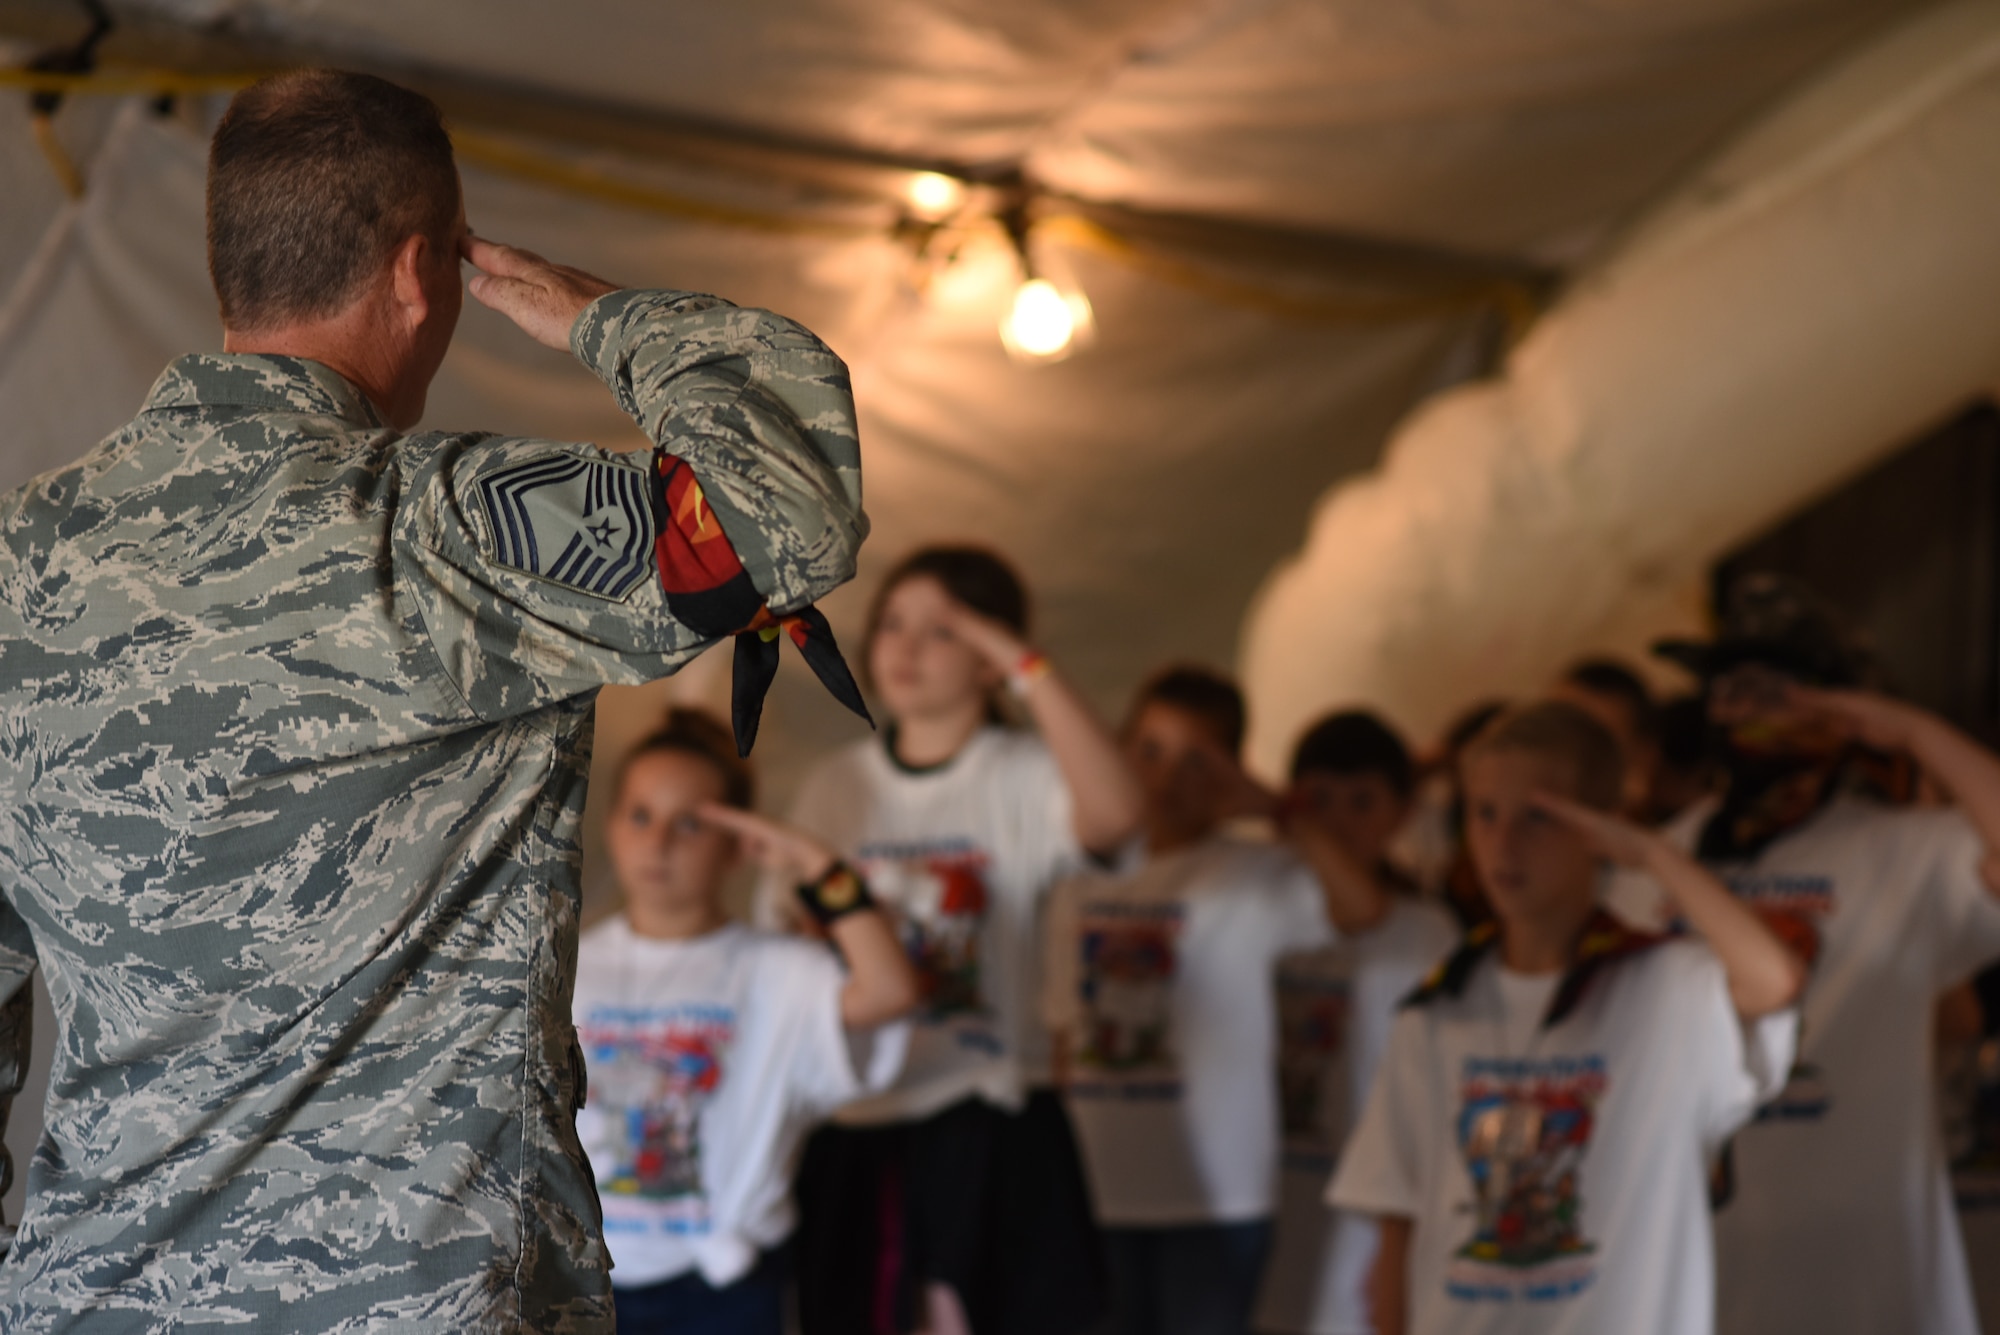 Chief Master Sgt. Richard Beard, 145th Aircraft Maintenance Squadron superintendent, teaches a group of nine to ten year-olds how to salute during the Annual North Carolina (NC) Operation Kids on Guard held at the NC Regional Training Site in Stanly County, Sept. 8, 2018. Children of military members were able to join in activities including short aircraft rides, engaging with military members while learning flight structure and commands, interactive displays with a C-17 Globemaster III and other aircraft, as well as a ropes course and bouncy castles.